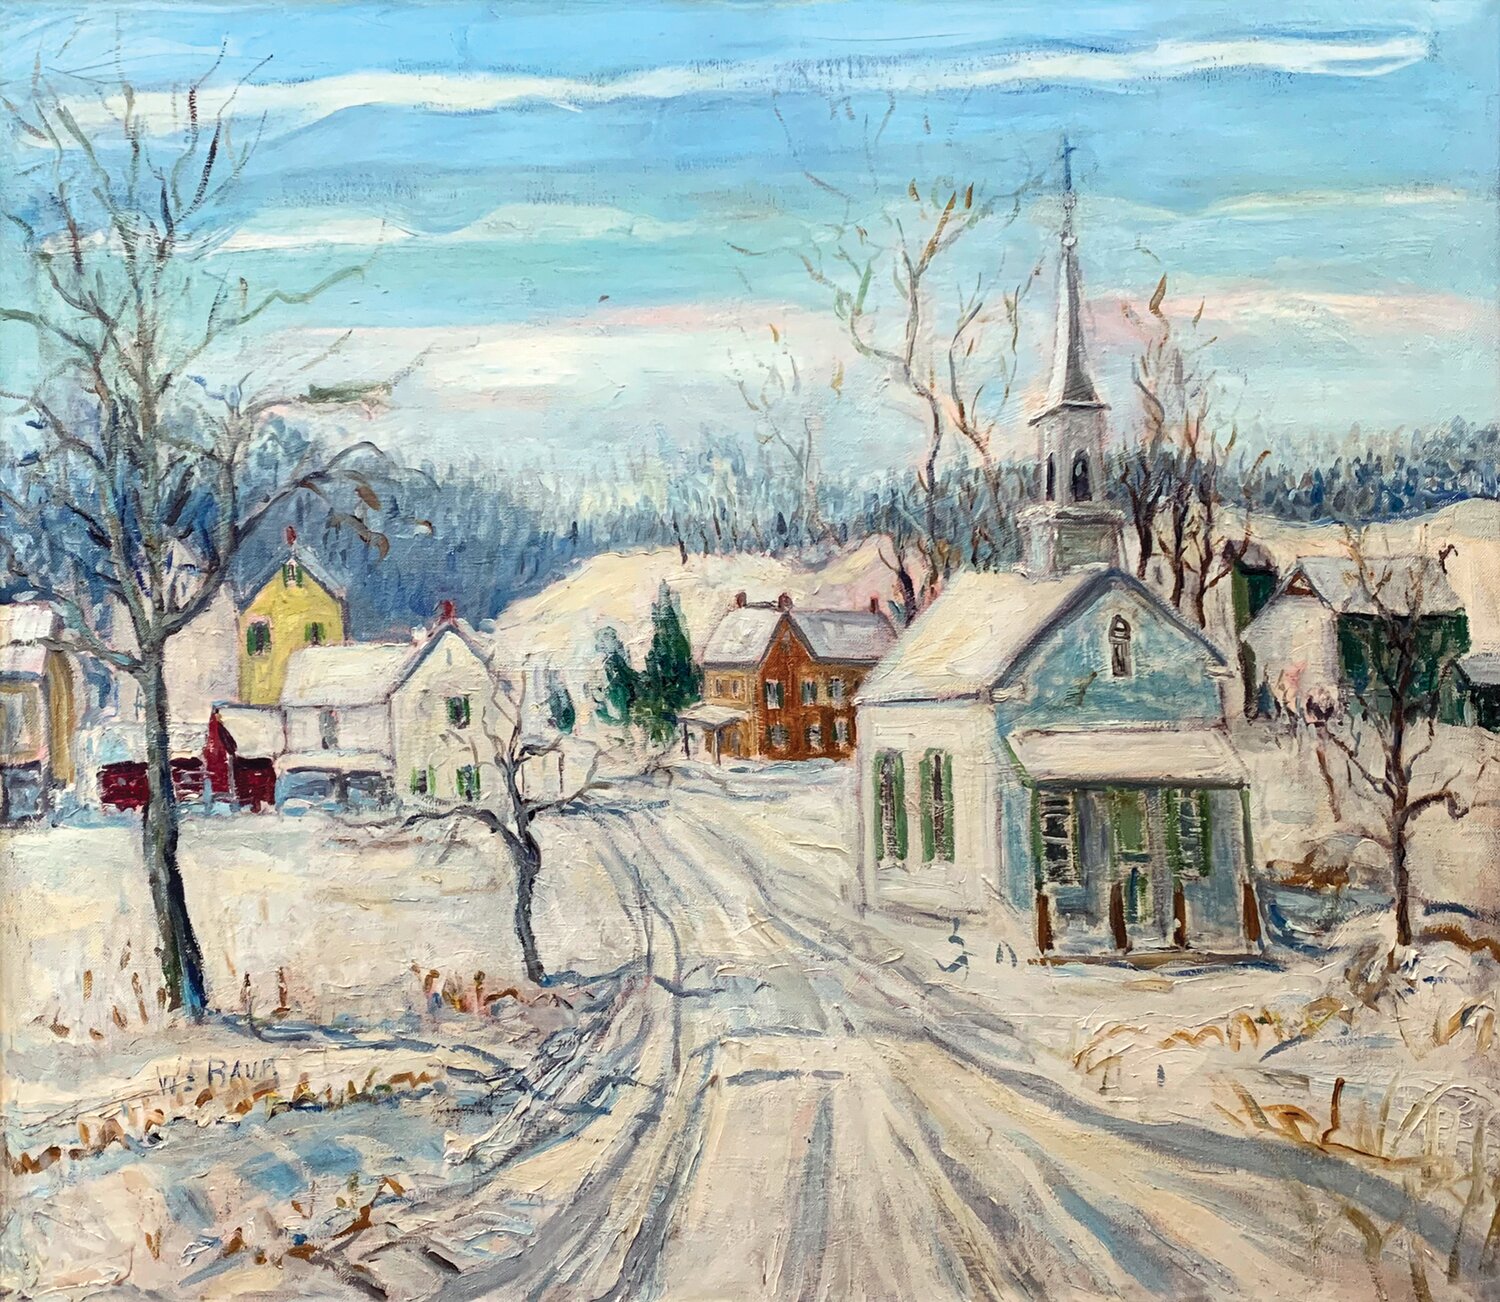 “Barndt Hill,” Earlington, Pa., is an oil on canvas by Walter Emerson Baum.